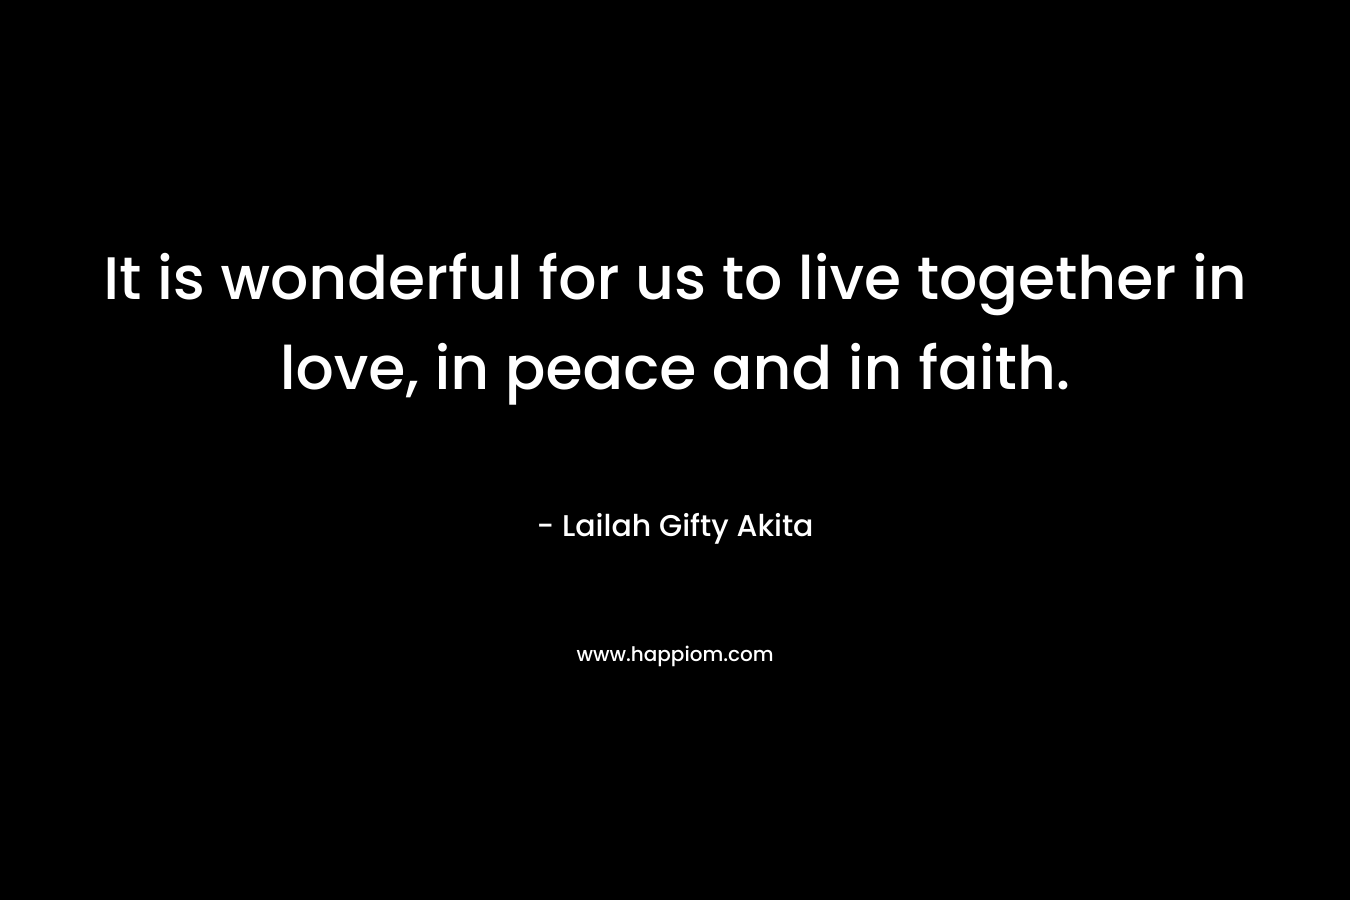 It is wonderful for us to live together in love, in peace and in faith.